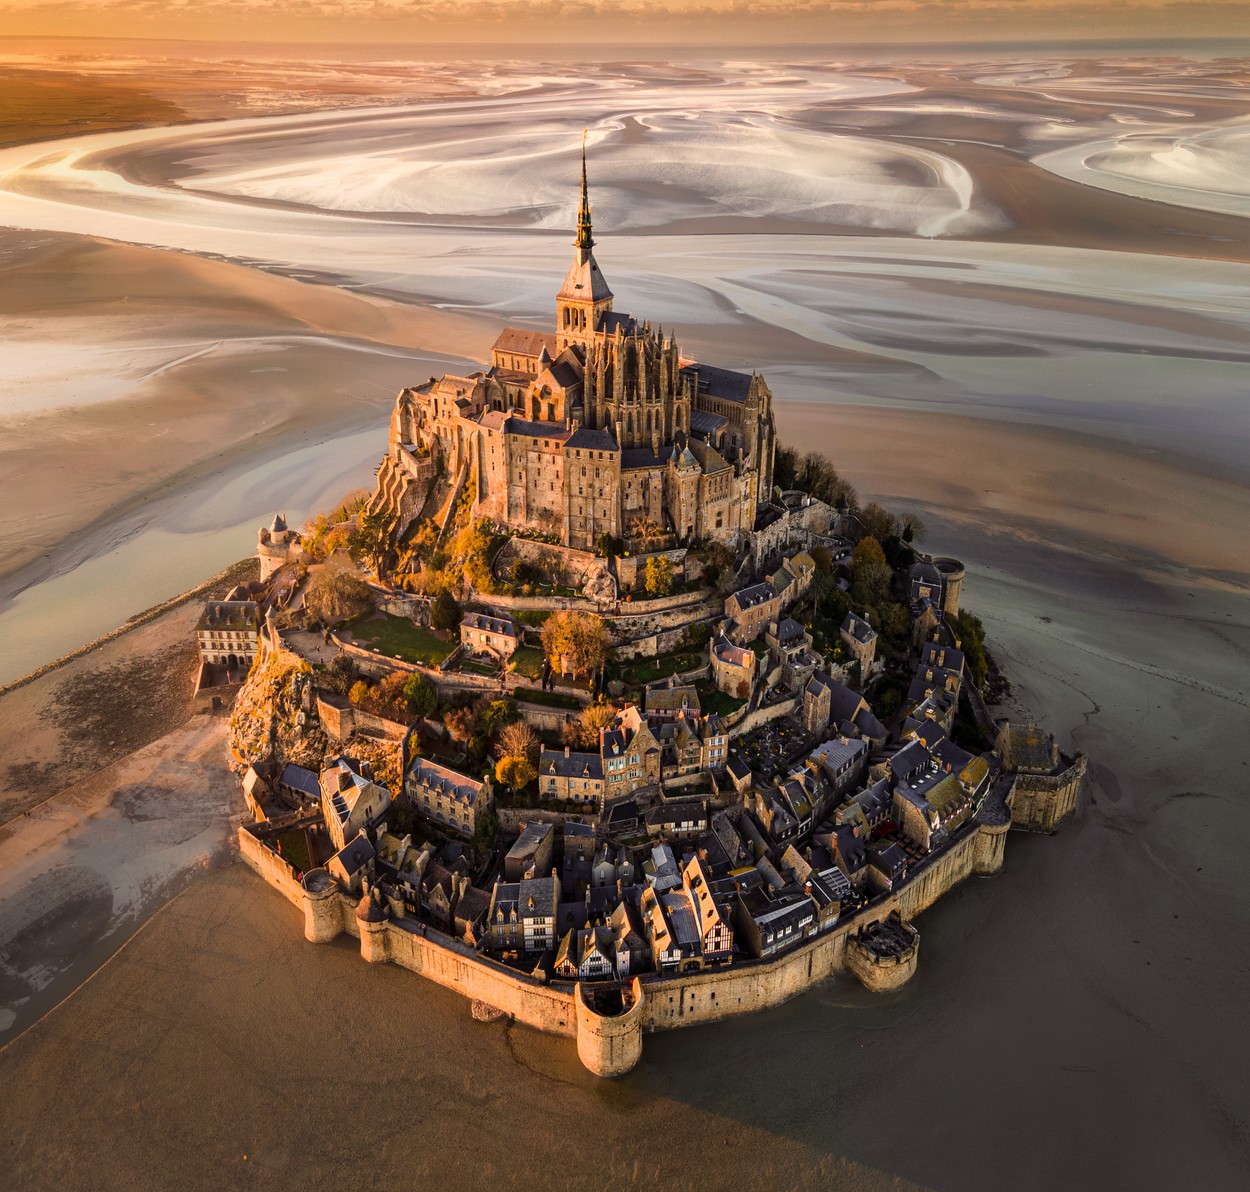 For me, this piece of art on the shores of Normandy is a candidate for Eighth Wonder of the World; providing a legendary view and atmosphere especially at sunset and when the tide is low. By Cigdem Ayyildiz. NORMANDY, FRANCE: UNBELIEVABLE pictures of both the natural world and man-made structures have been named as the shortlisted photos in this year’s open competition of the Sony World Photography Awards. One of the landscape category photos, Outburst by Luis Manuel Vilarińo Lopez from Spain, shows Iceland’s youngest volcano, Geldingalir, with lava flowing down its sides towards the camera. Another photo, Murmuration by James Crombie, shows a flock of starlings over Lough Ennell in Ireland, forming the shape of a large bird in flight. The photos have been shortlisted in the open competition of the Sony World Photography Awards 2022, run by the World Photography Organisation and judged by Hideko Kataoka, Director of Photography at Newsweek Japan. mediadrumimages/CigdemAyyildiz,Image: 670956221, License: Rights-managed, Restrictions: , Model Release: no, Credit line: Profimedia